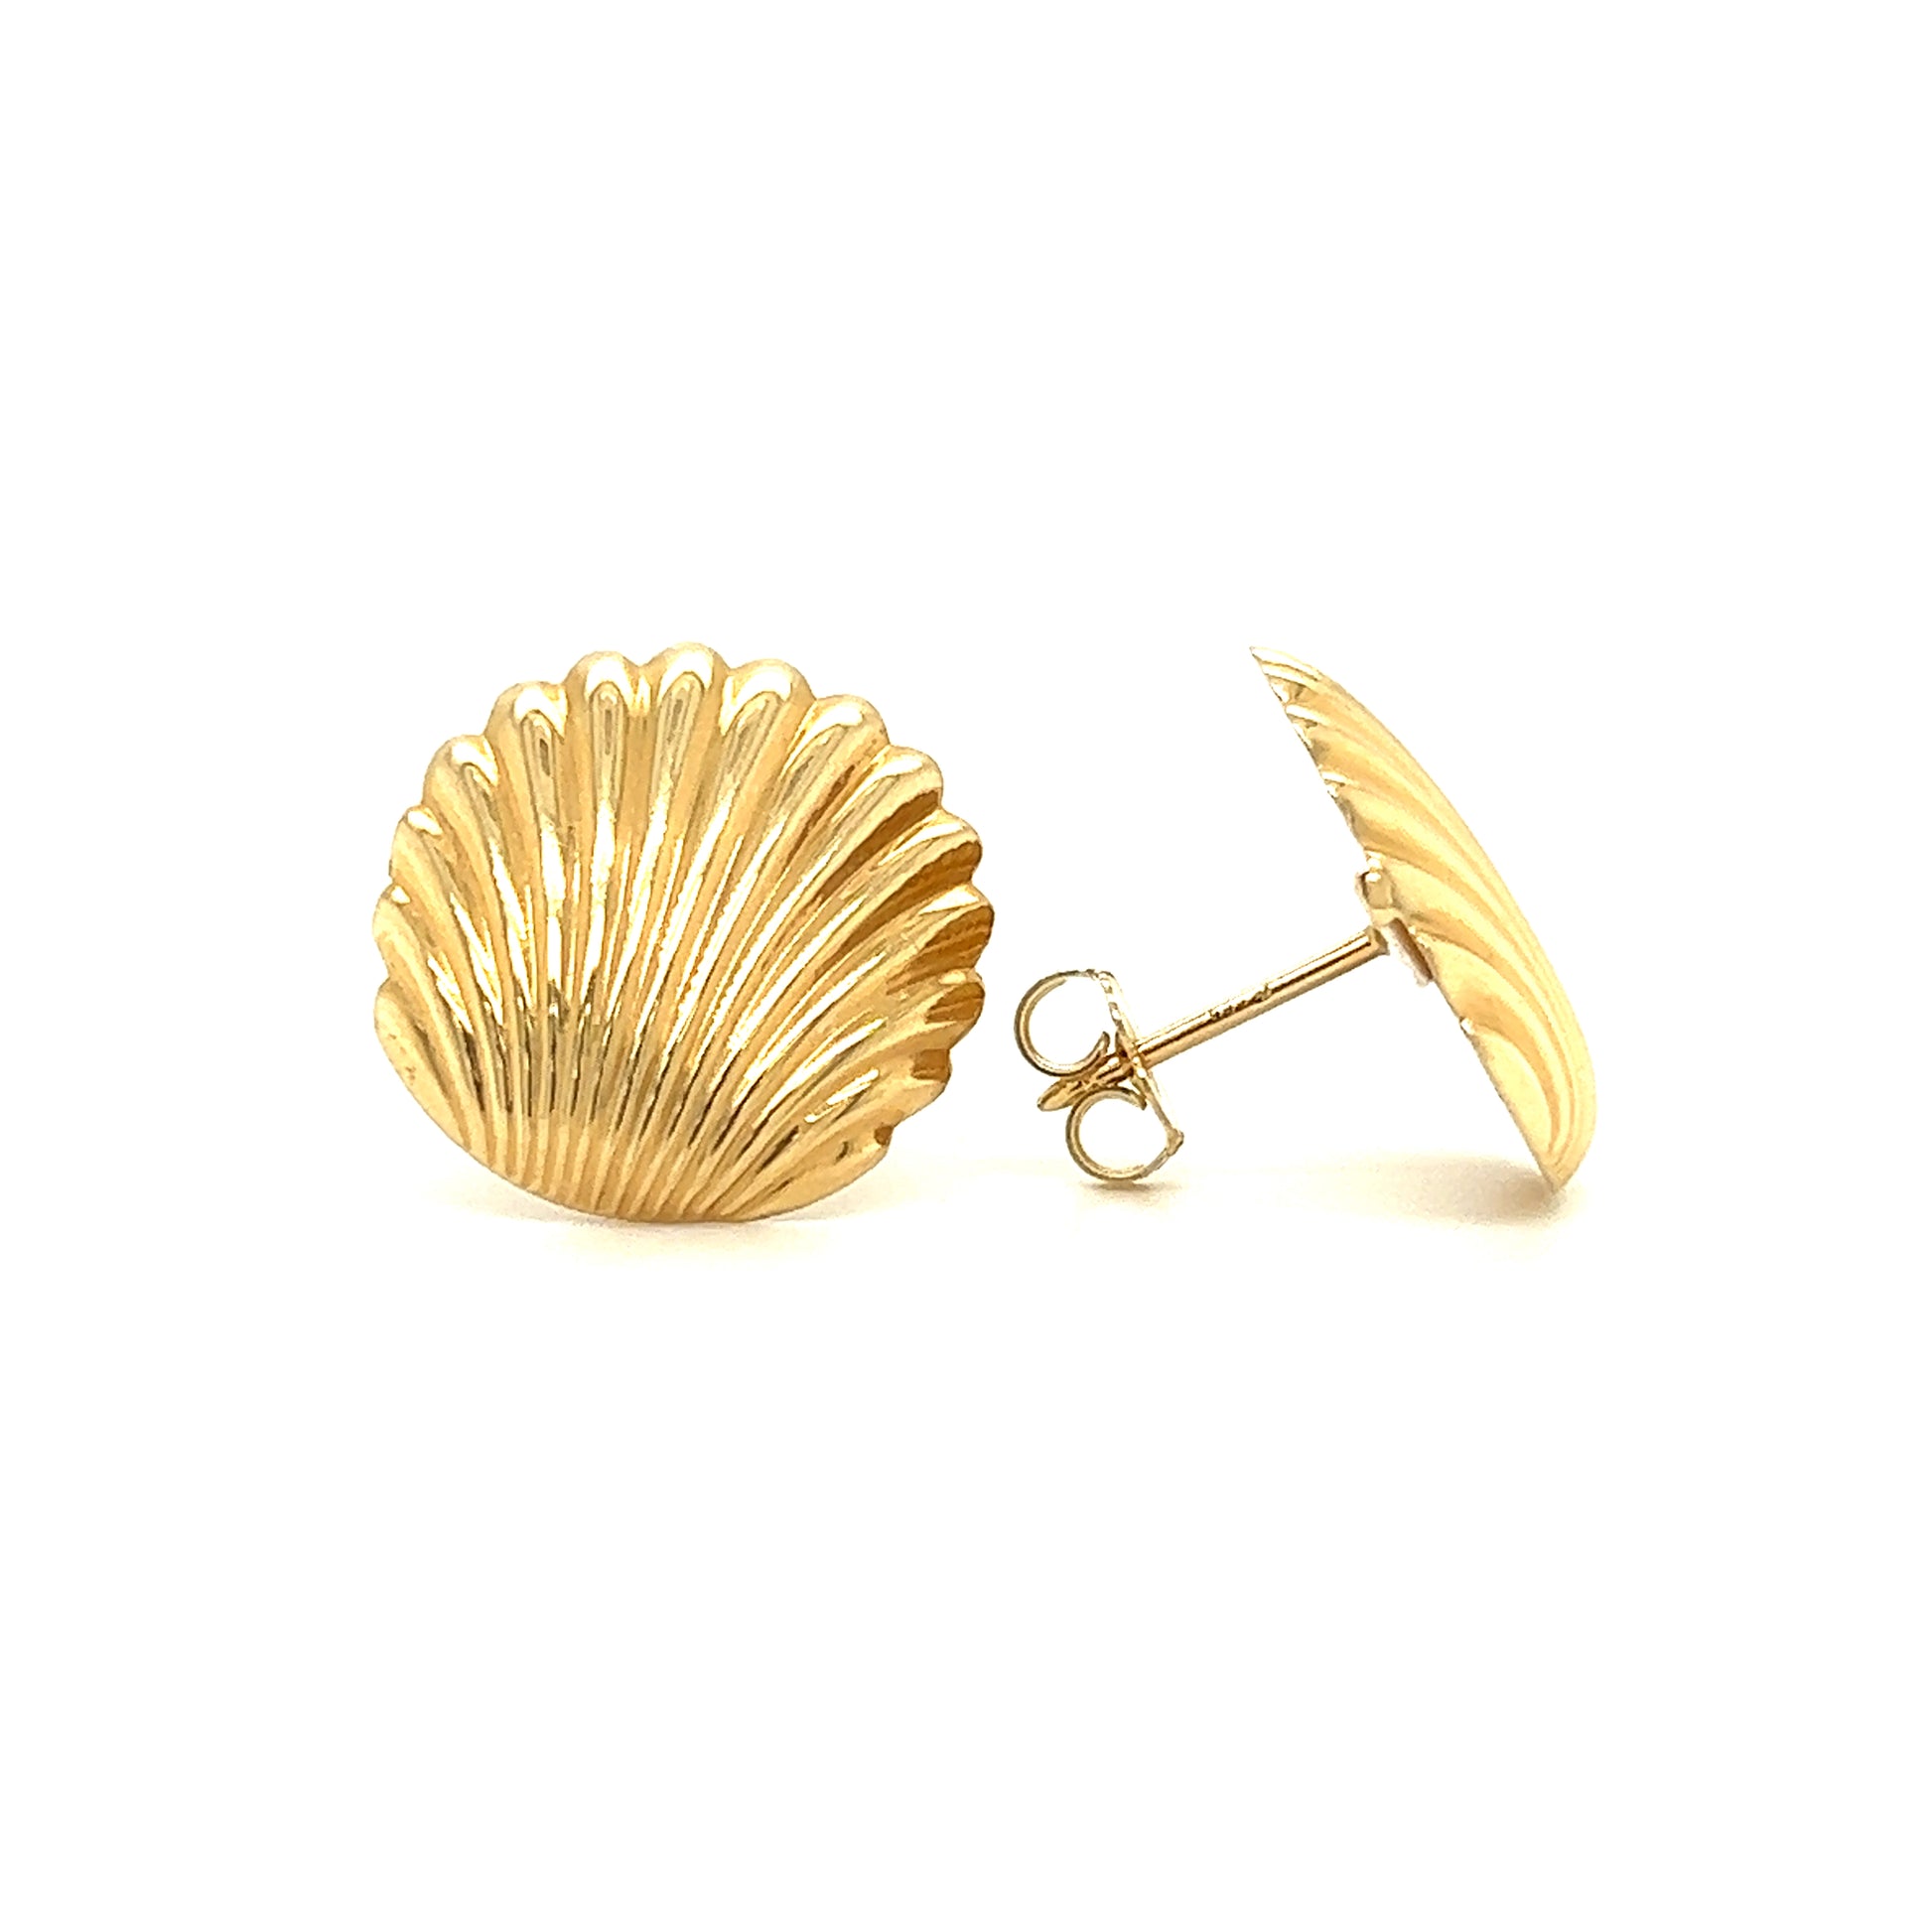 Scallop Post Earrings in 14K Yellow Gold Front and Side View